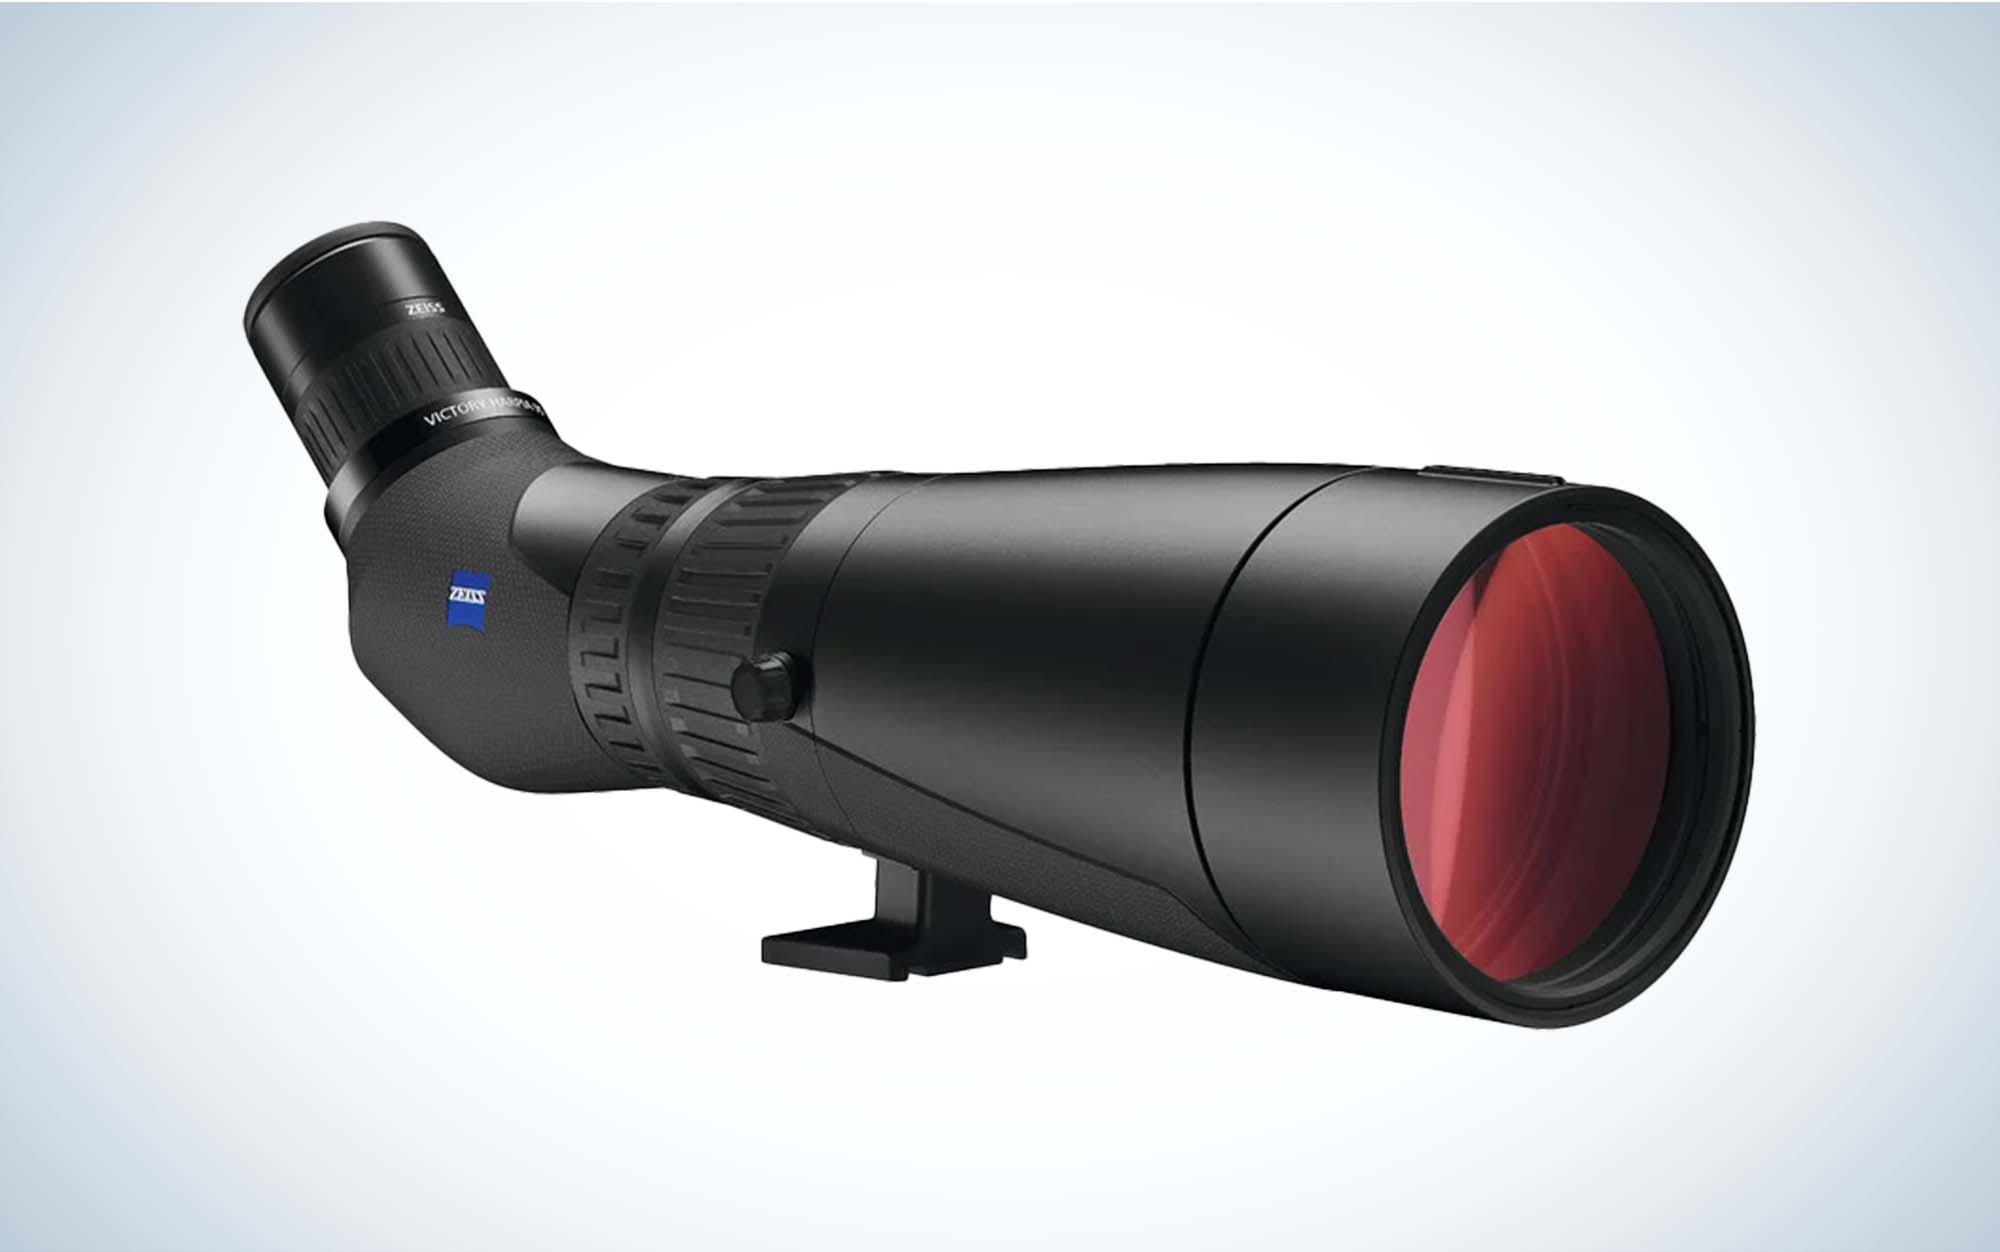 The Zeiss Victory Harpia is the best premium spotting scope.